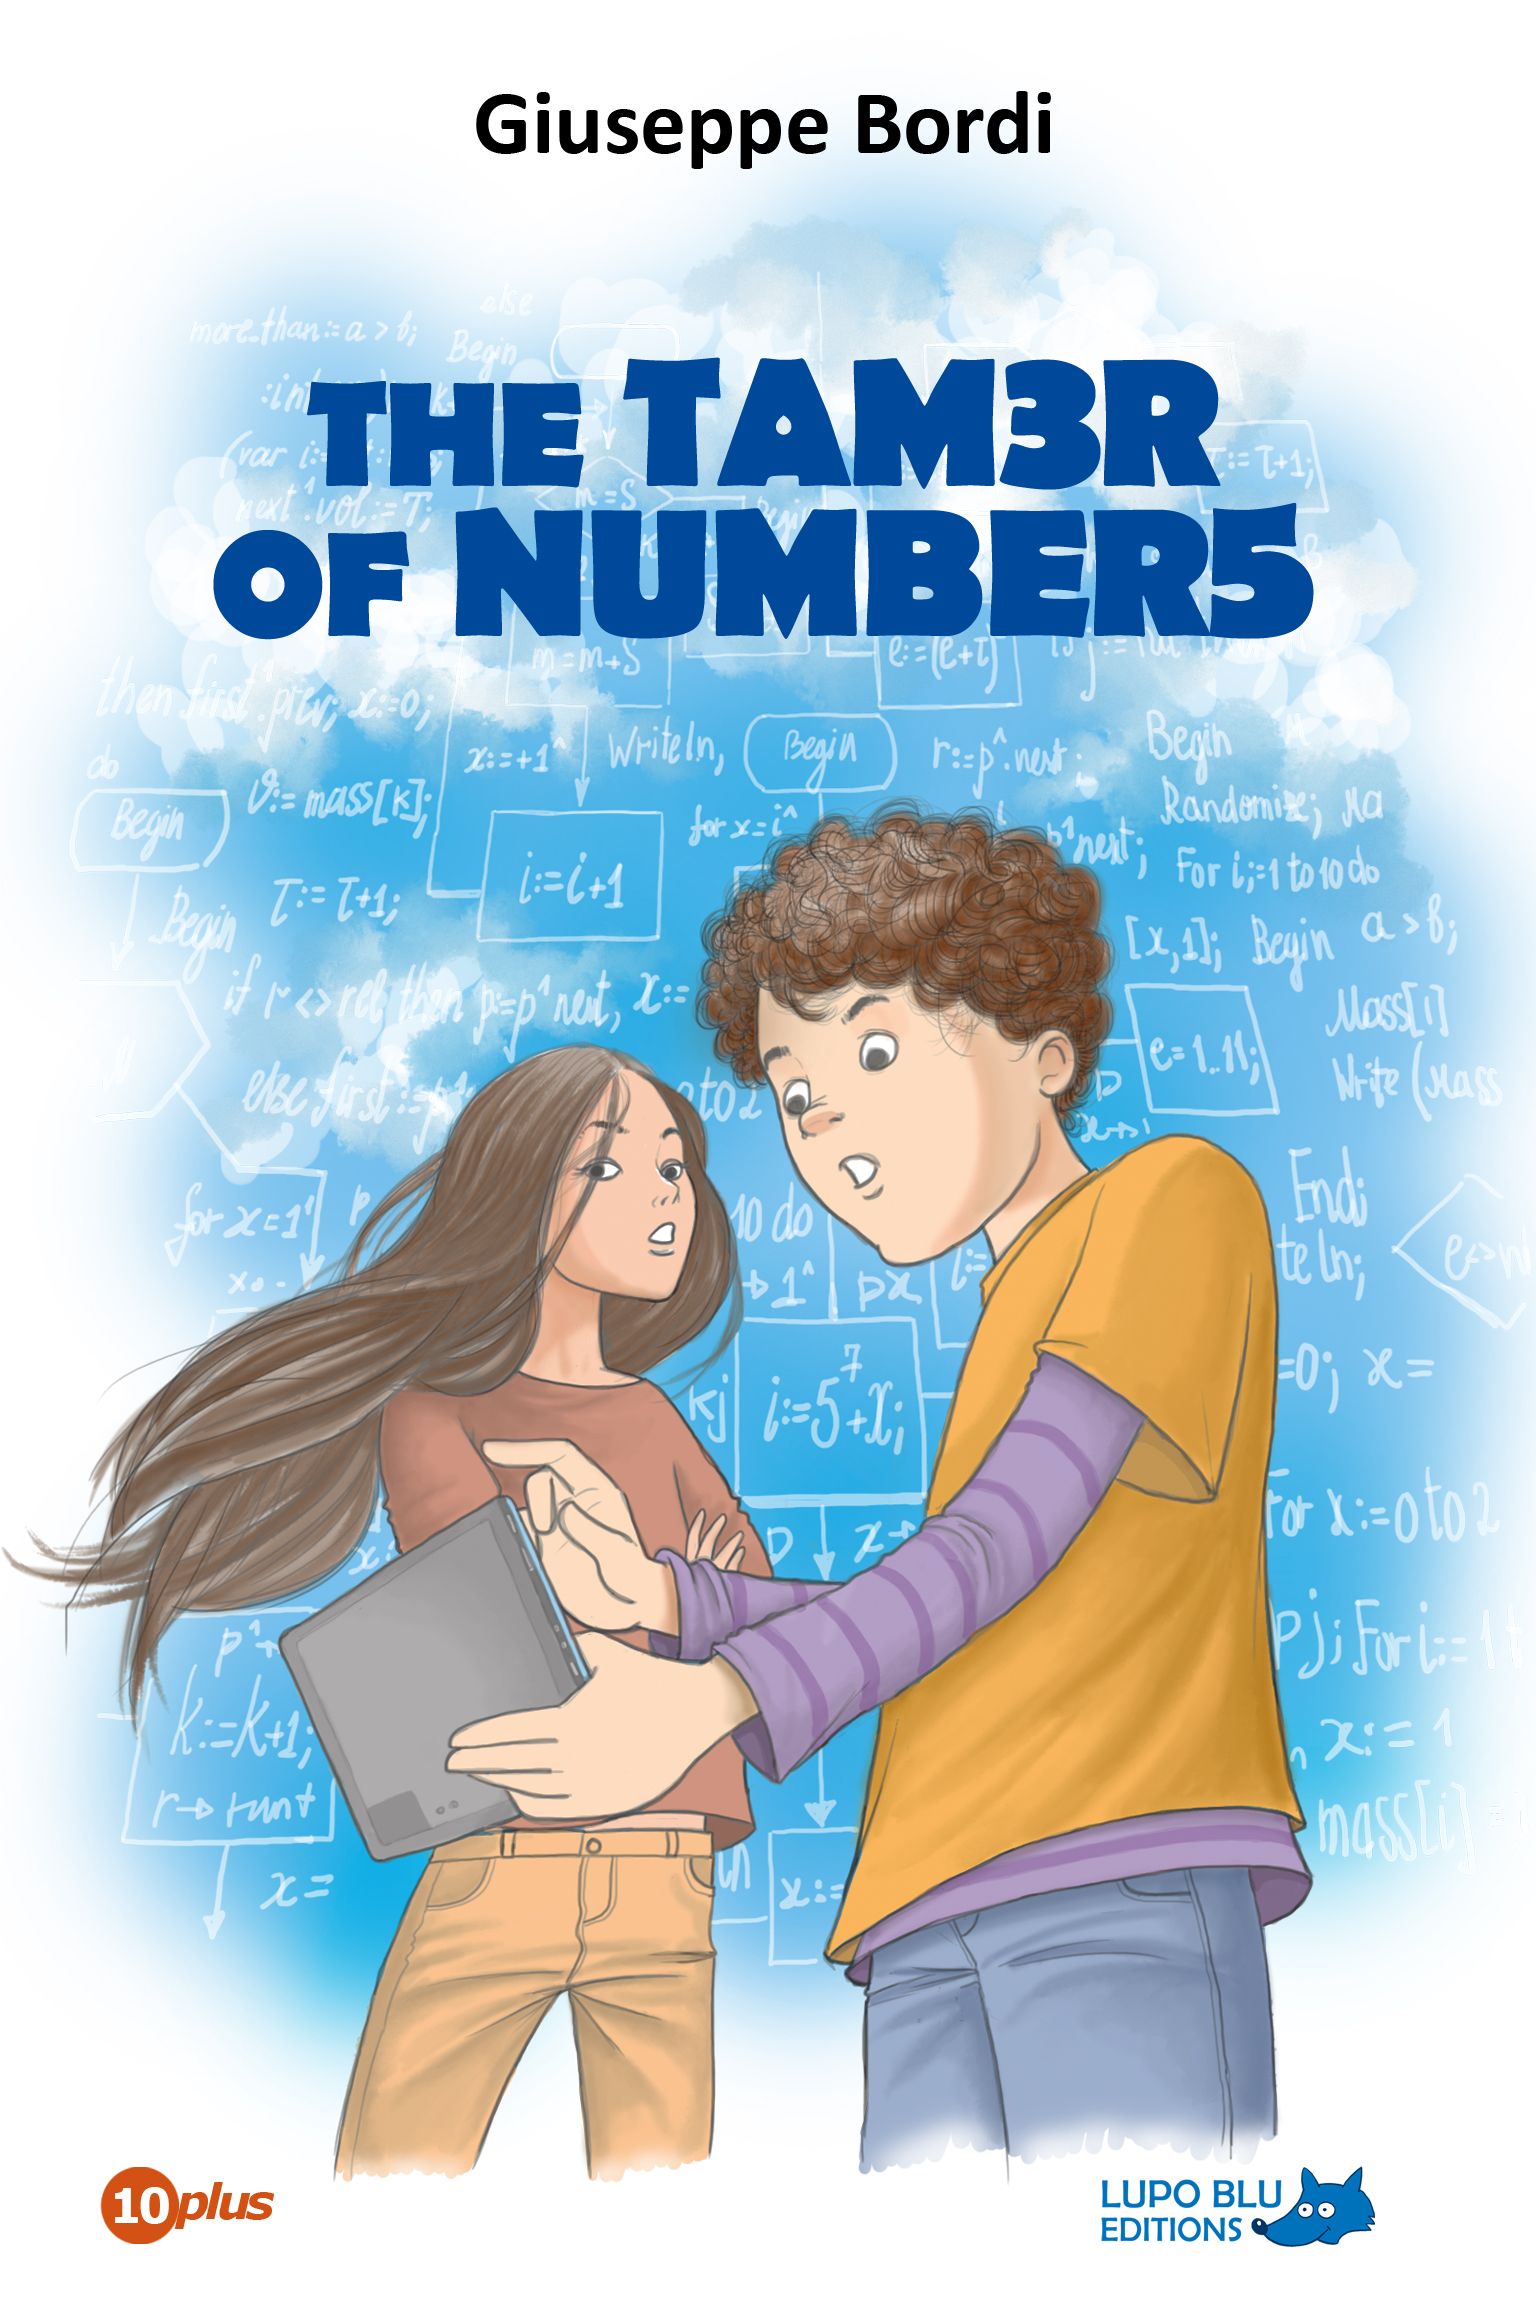 The tamer of numbers's Book Image